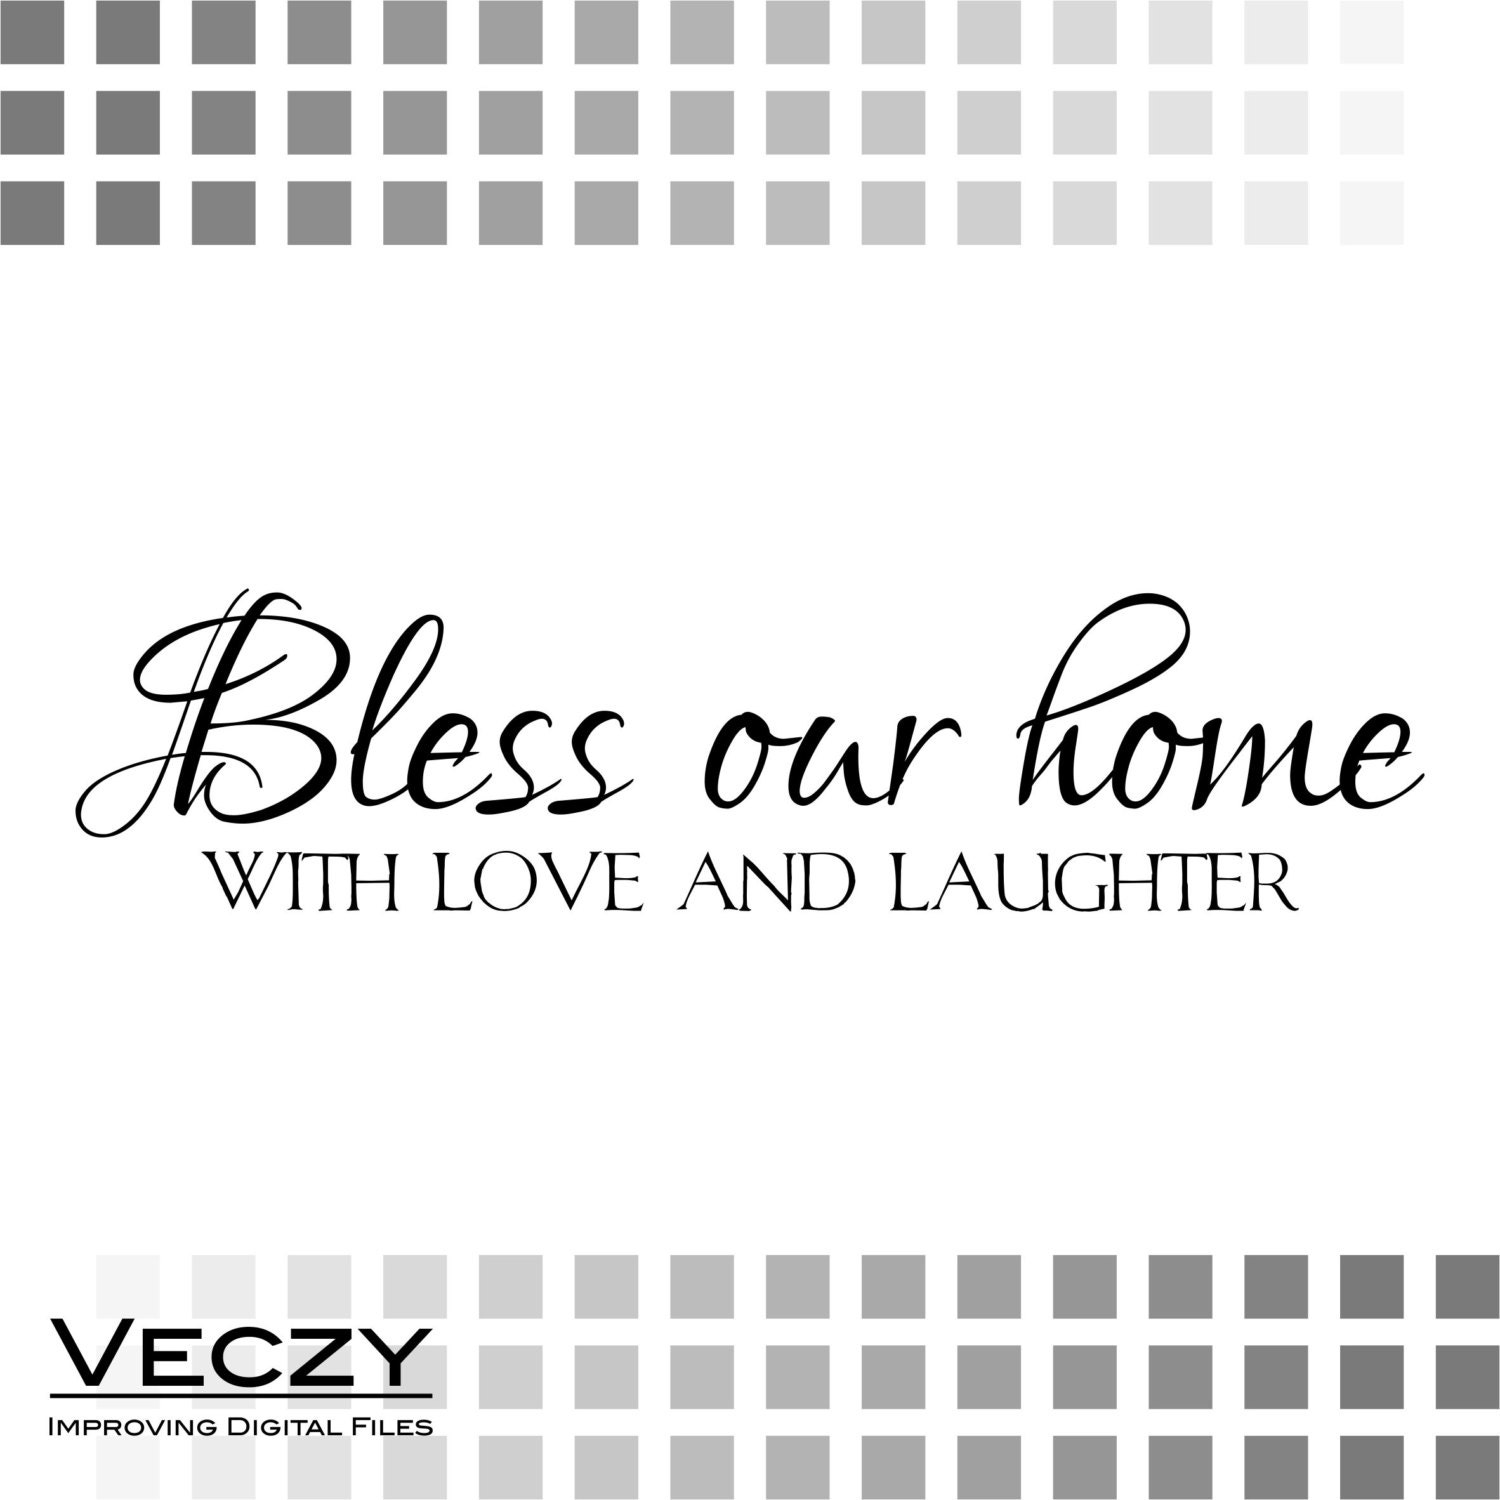 Download Bless our Home with Love and Laughter svg quotes svg by Veczy